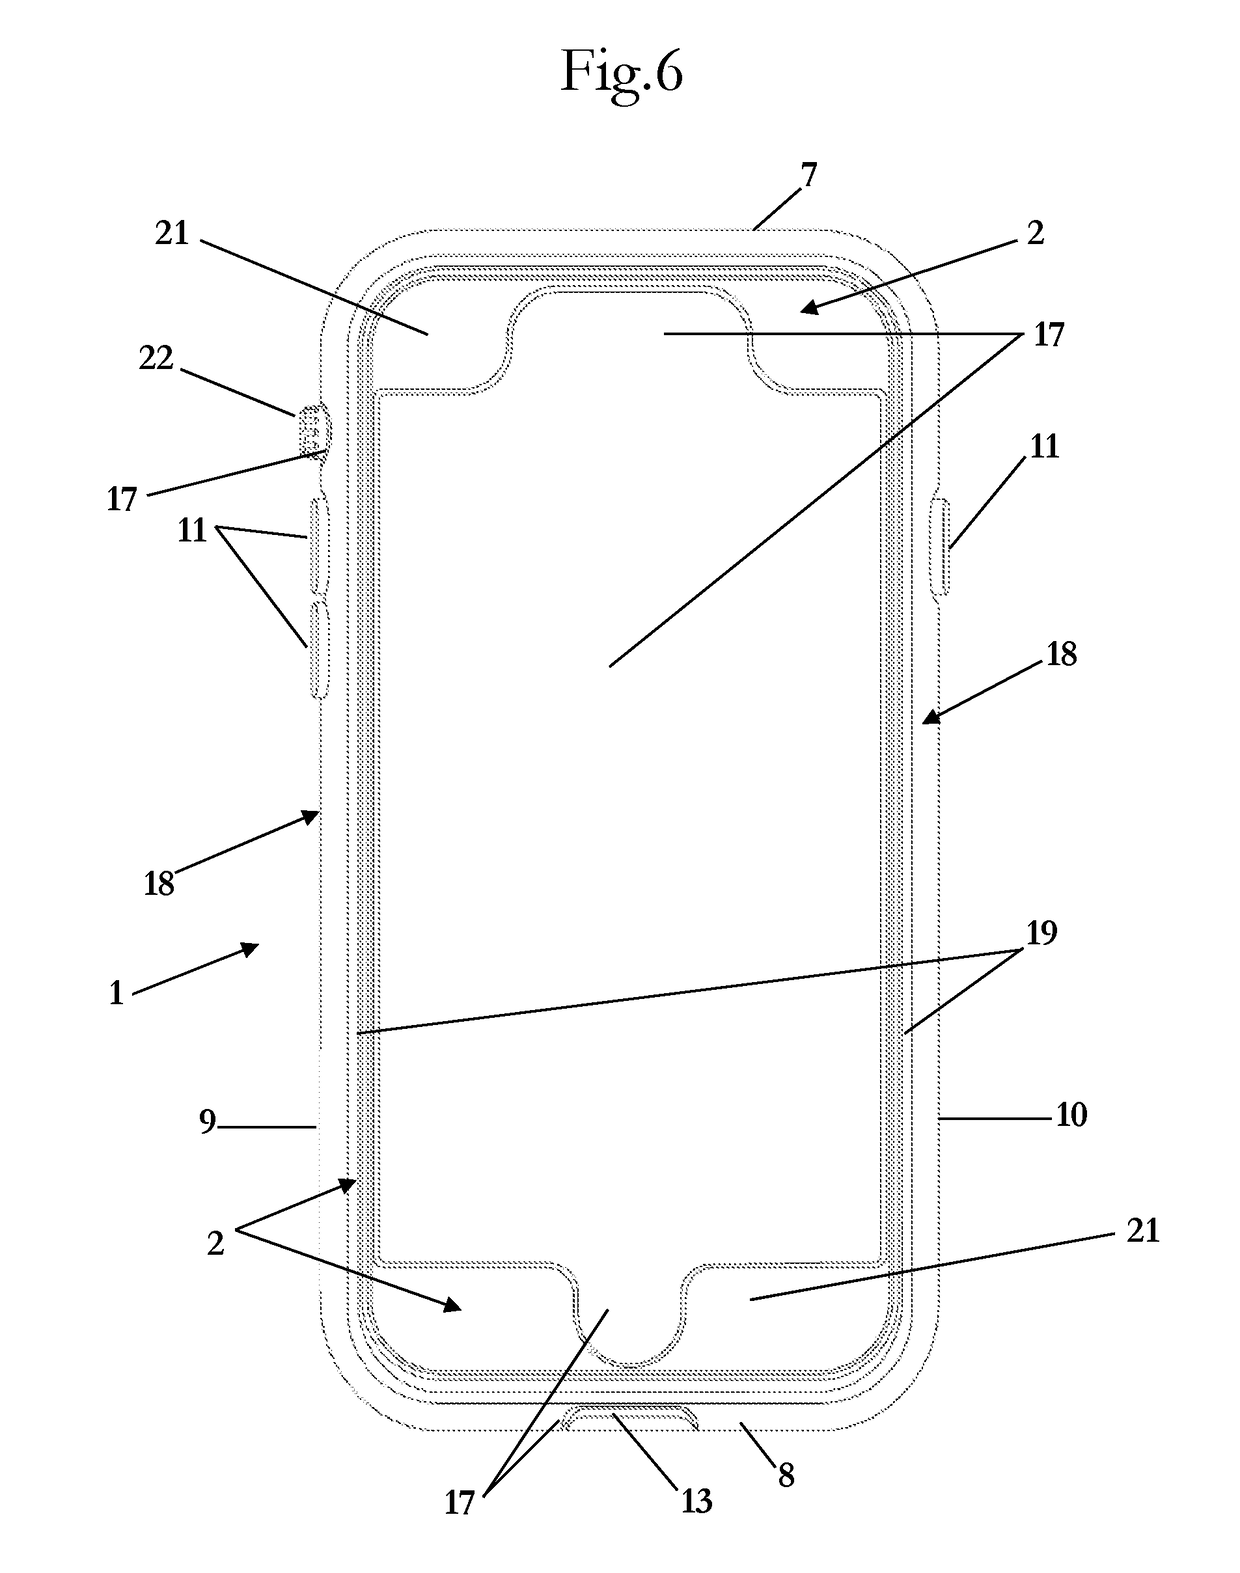 Dual-Layer Bumper for a Case for a Mobile Device